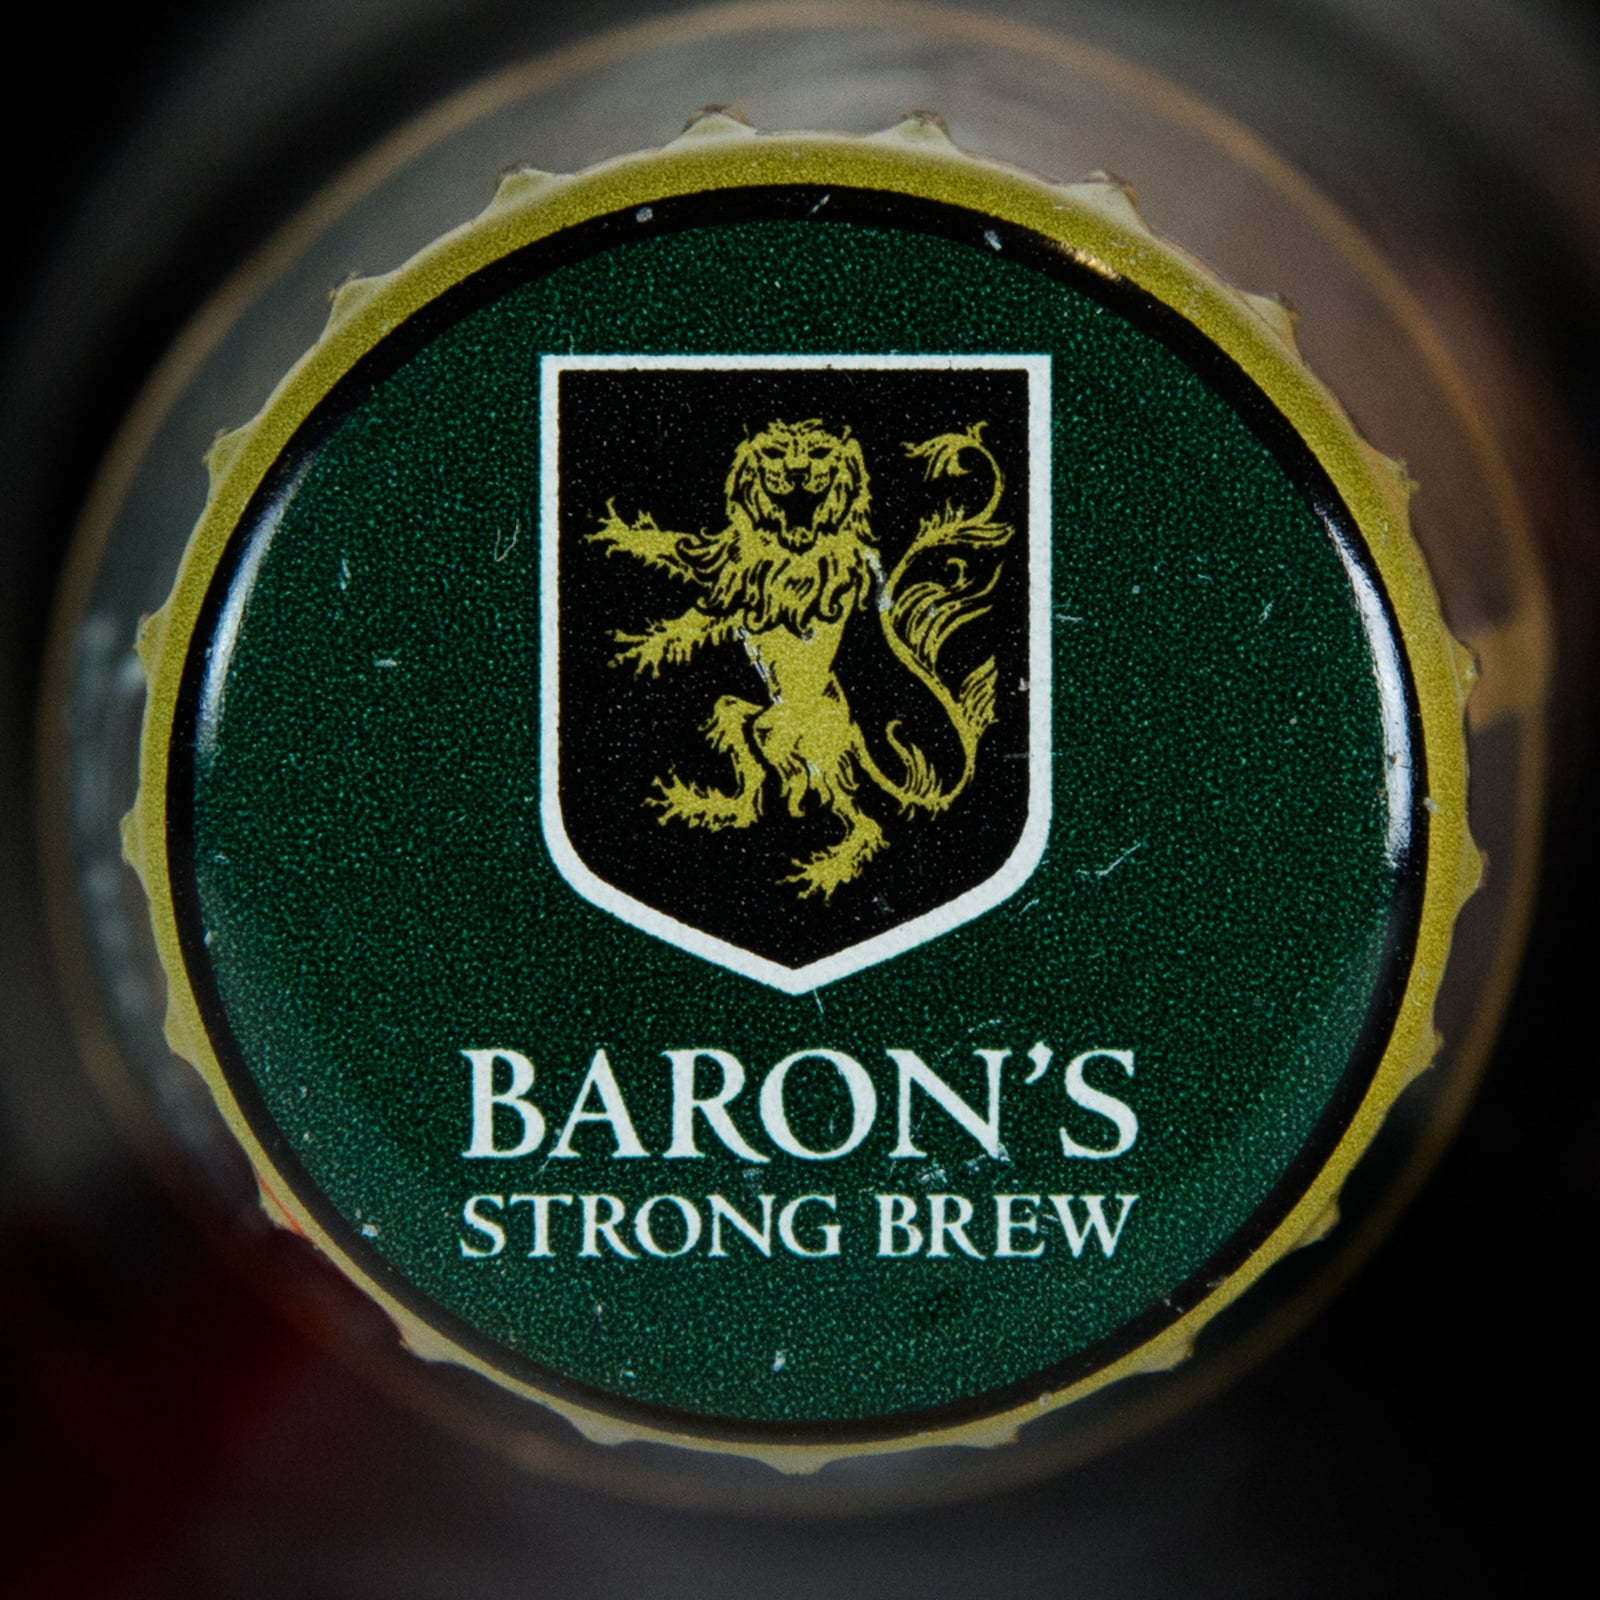 Baron's Strong Brew Beer Bottle, 640 ml